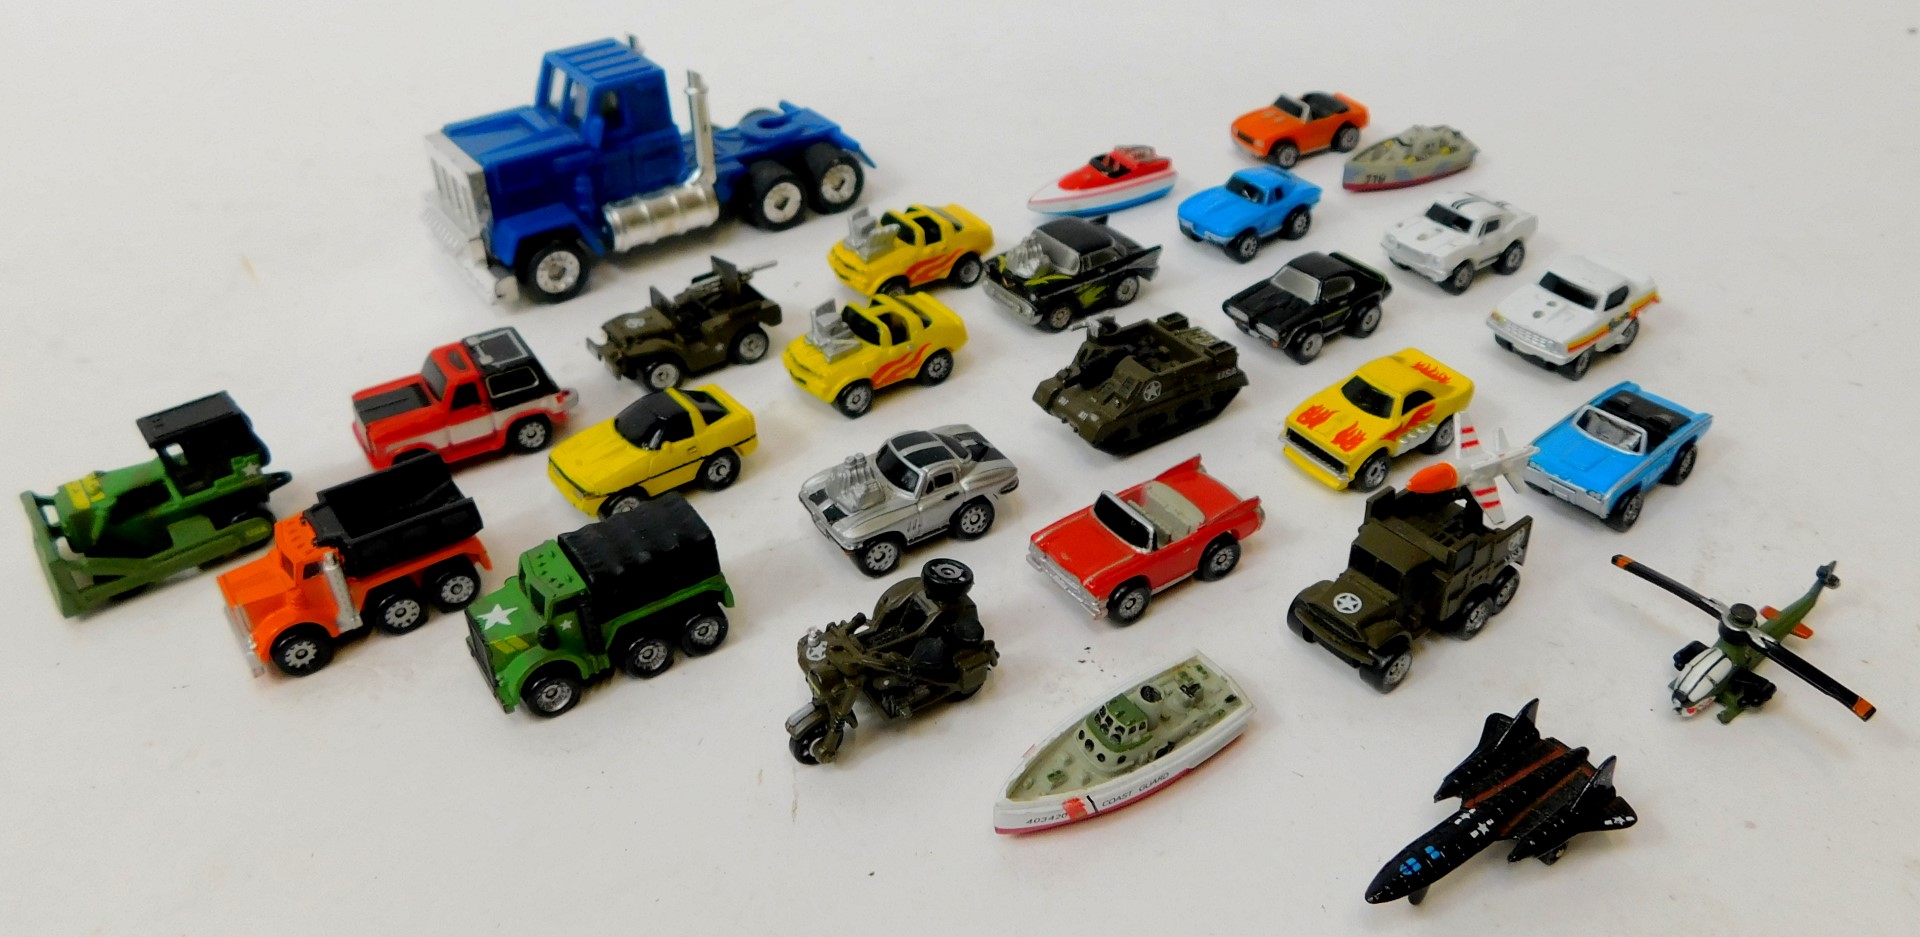 Galoob Micro Machines vehicles and accessory sets, including Rock Quarry, Beach, vehicles and other - Image 2 of 2